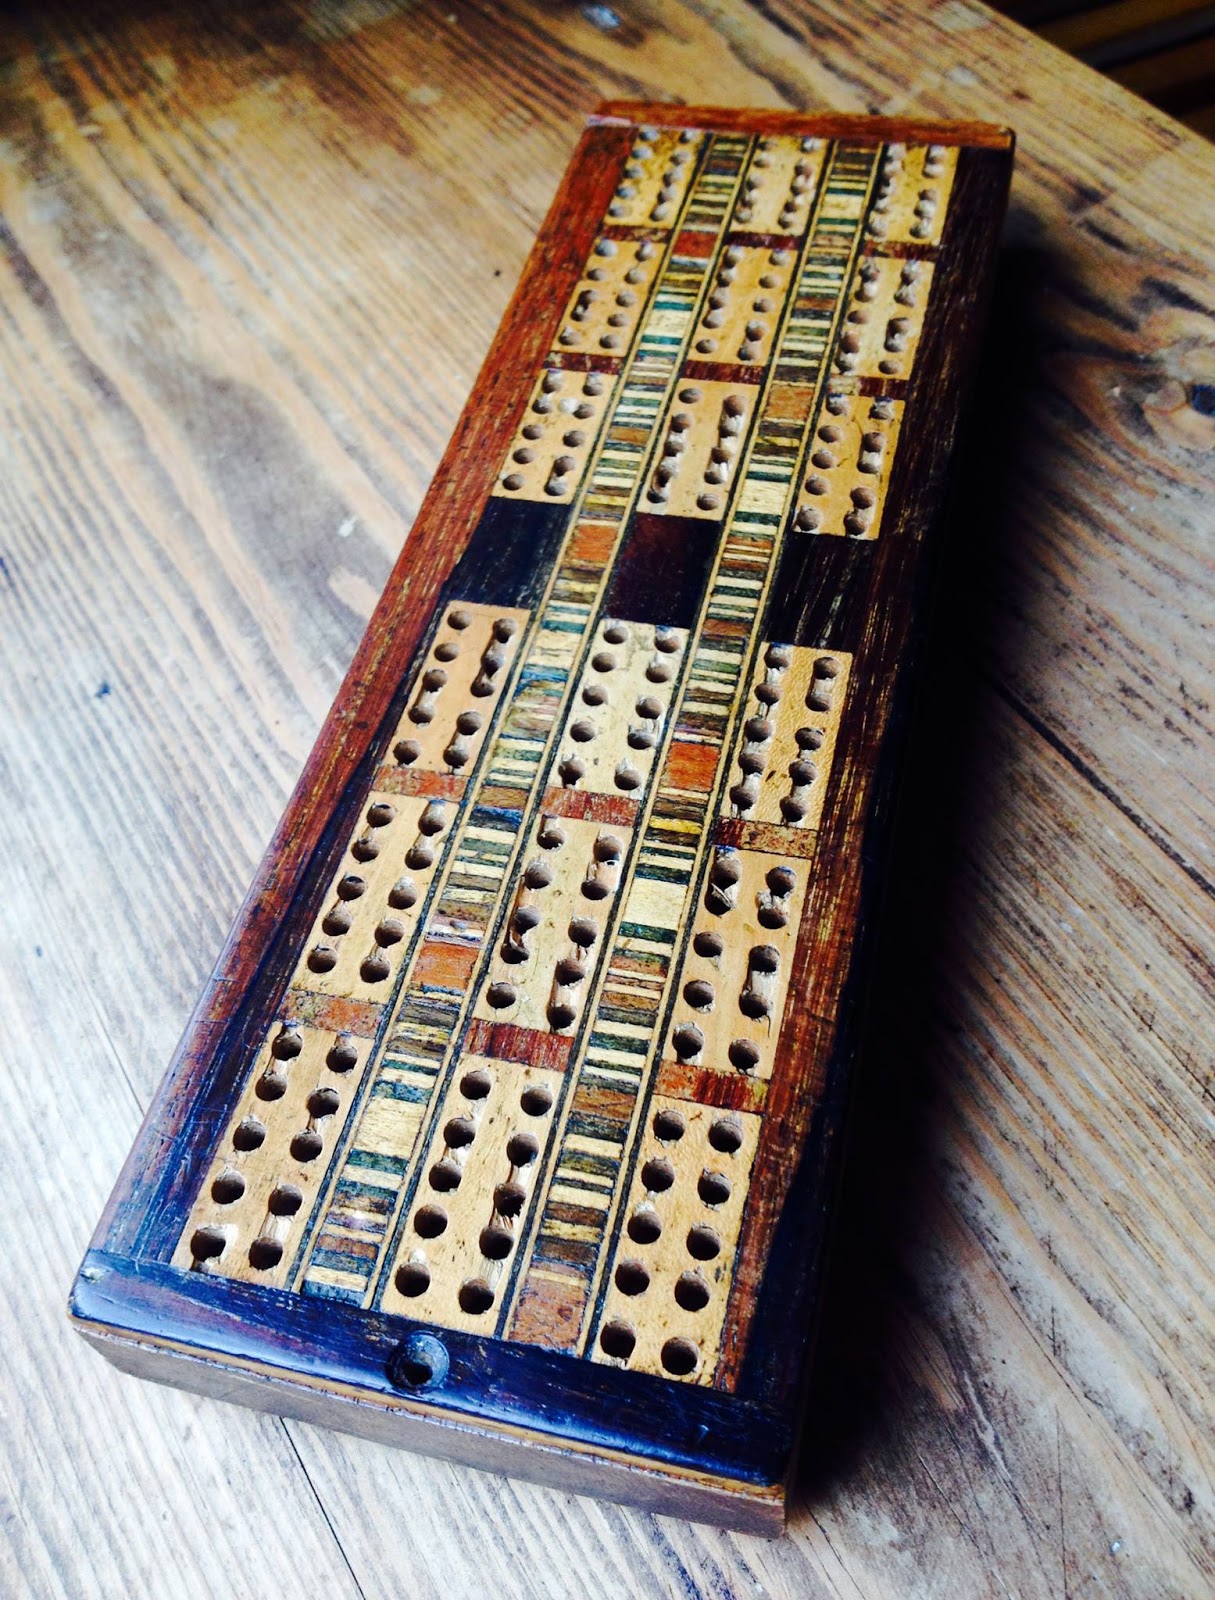 Shove it, Chuck it, Toss it...: Some Cribbage Boards